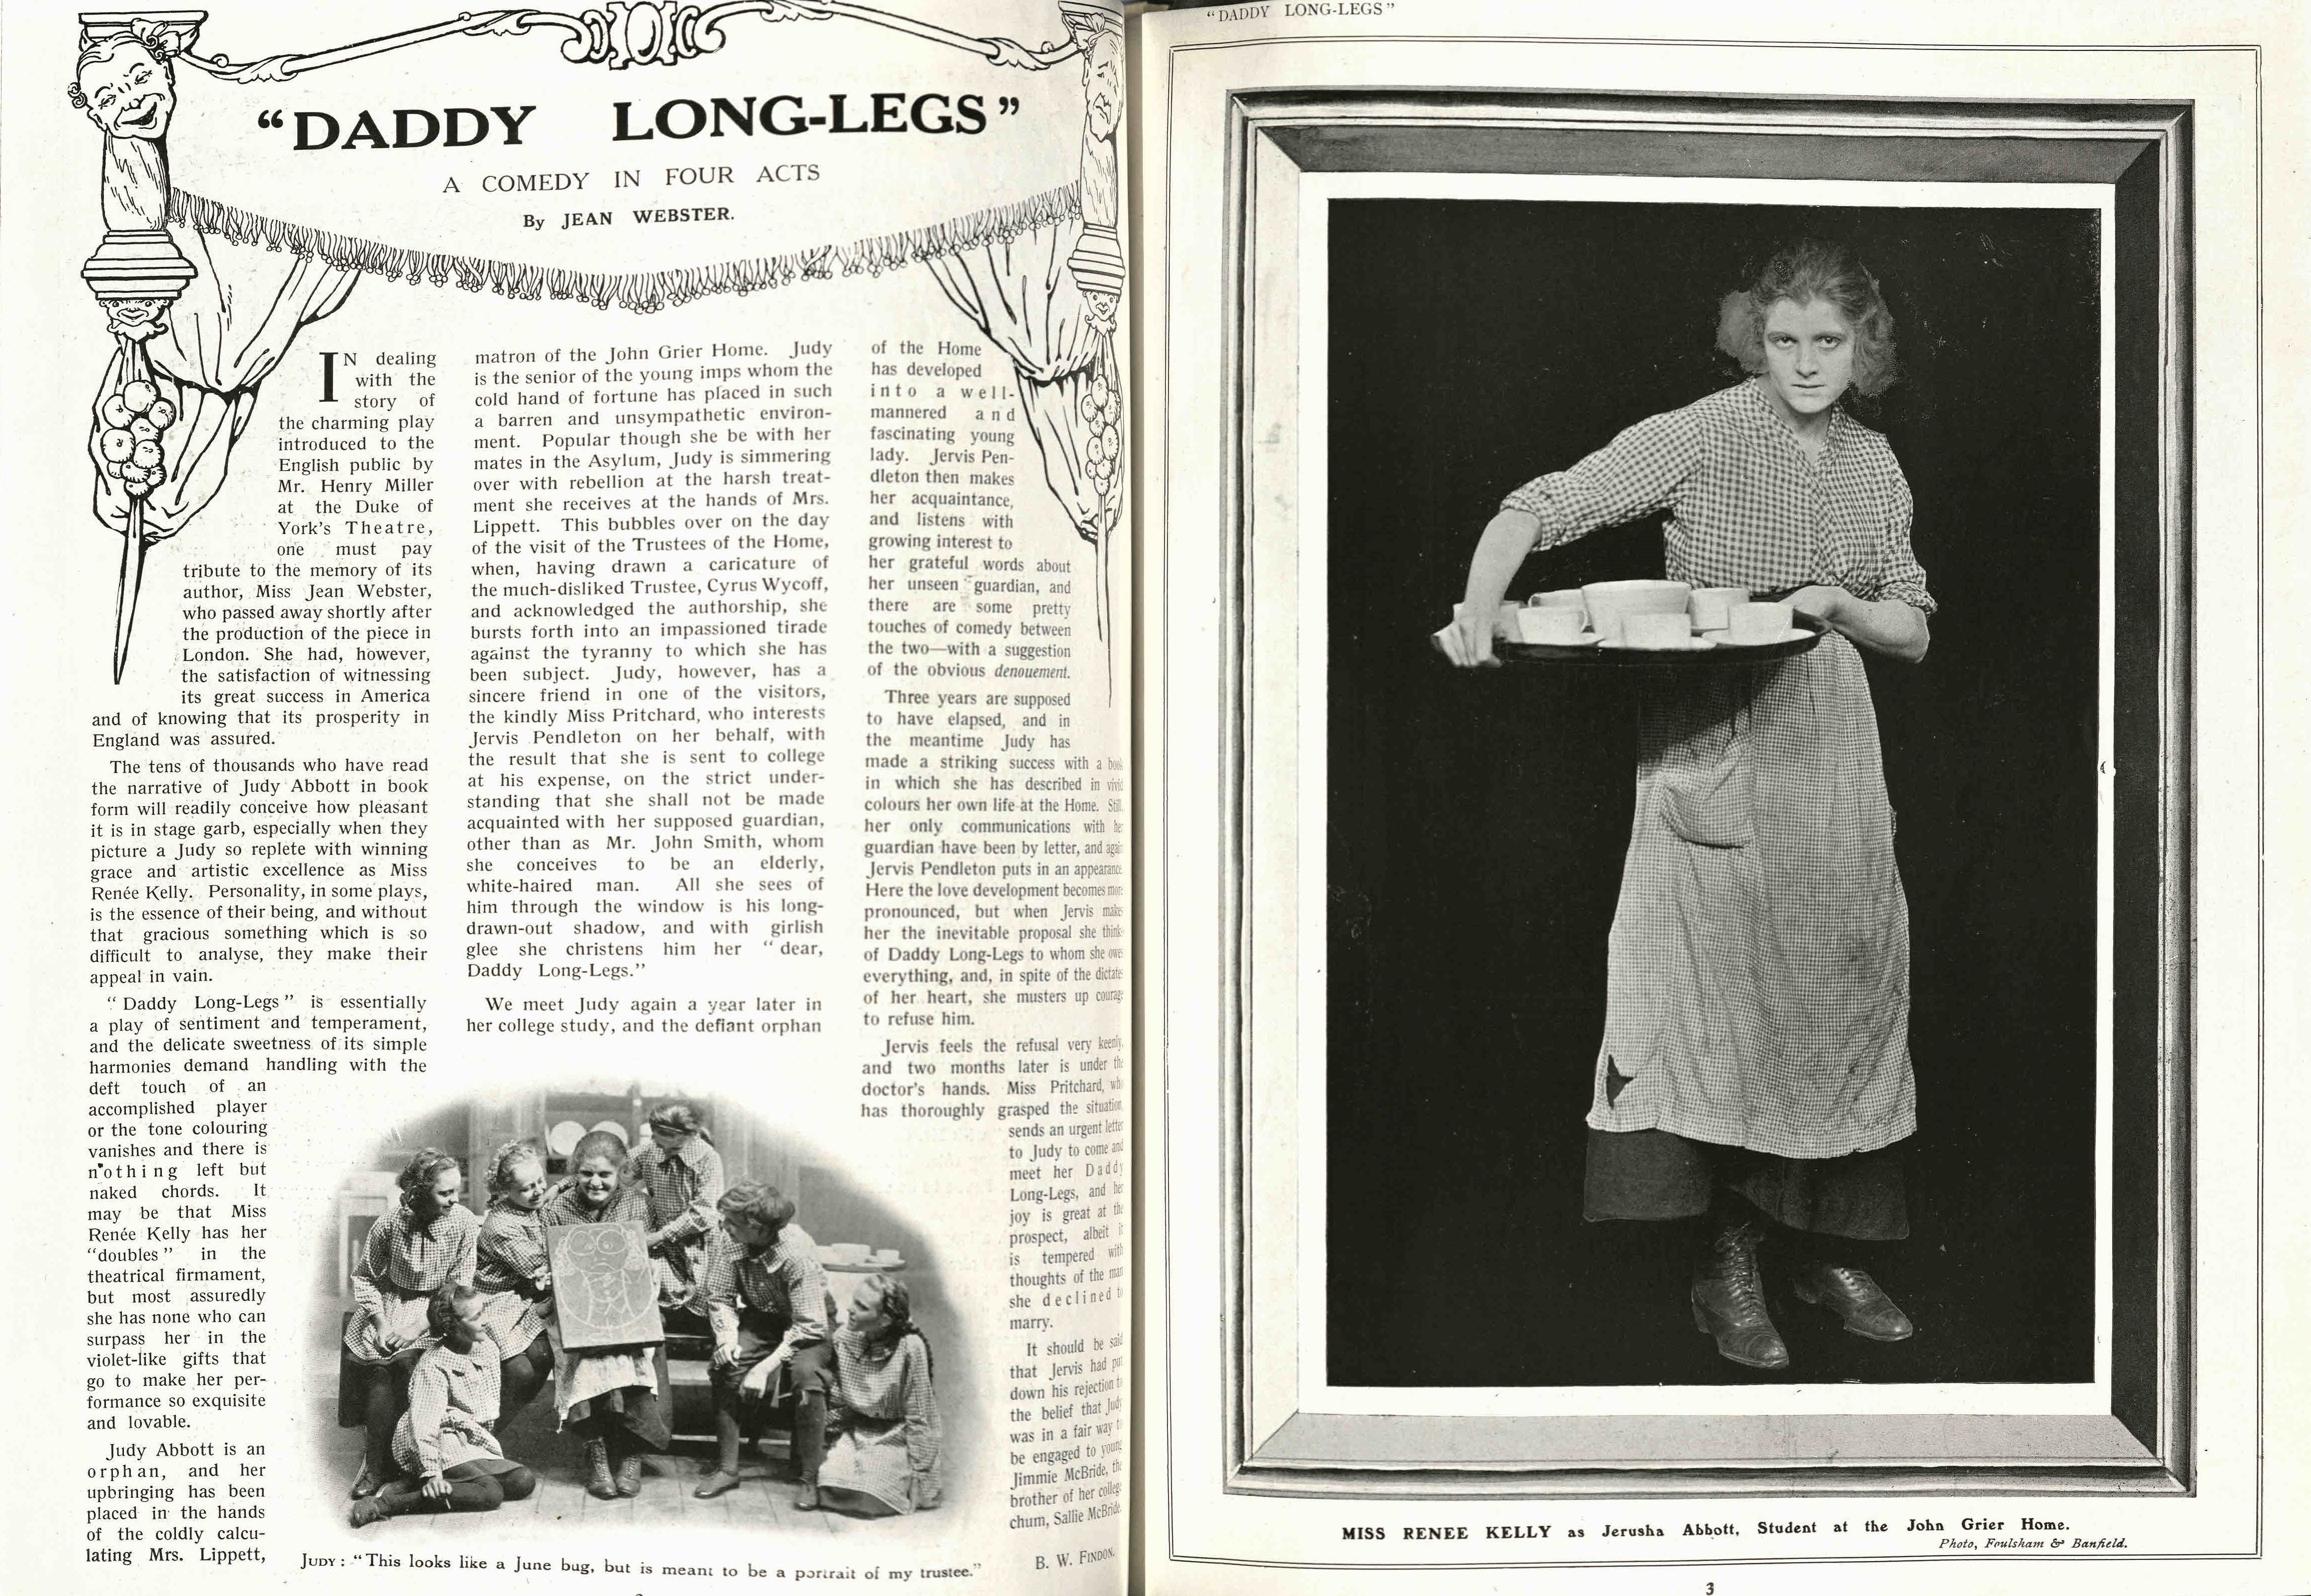 Extract from the Play Pictorial for Daddy Long Legs